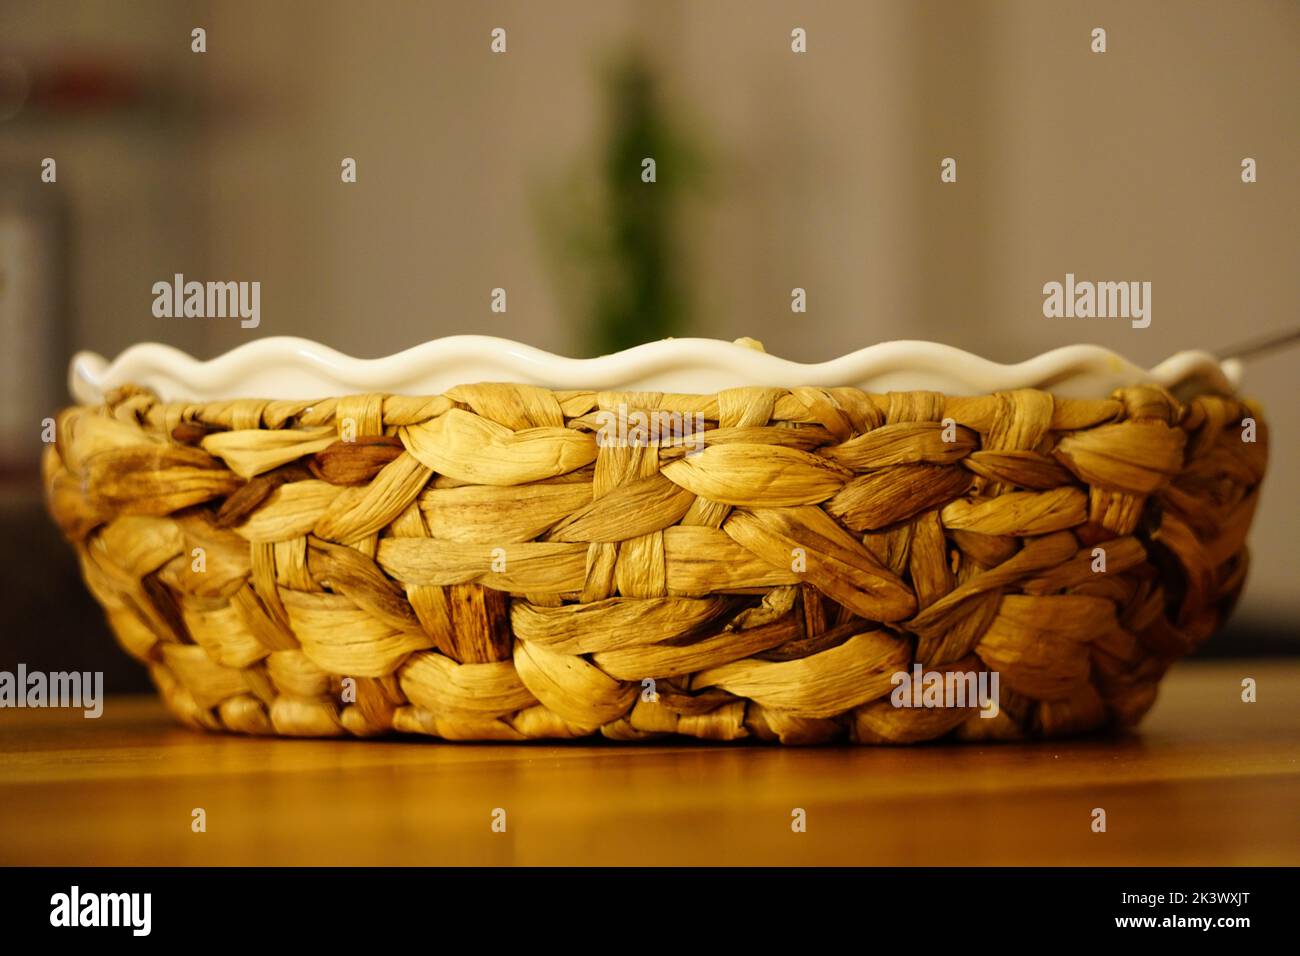 The close-up view of a decorative bowl over the wooden surface Stock Photo